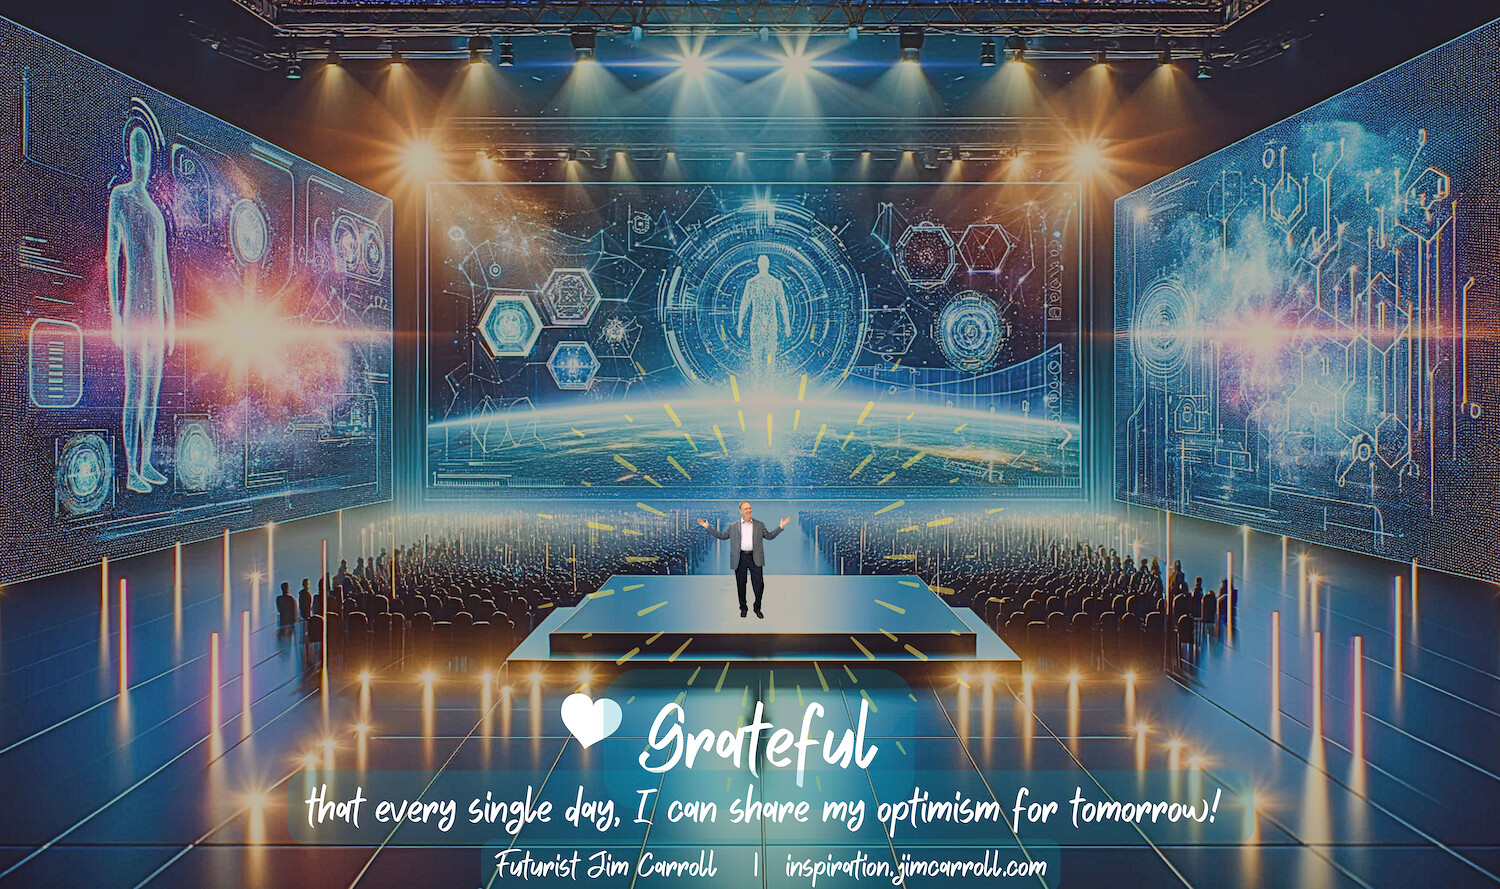 "Grateful that every single day, I can share my optimism for tomorrow!" - Futurist Jim Carroll